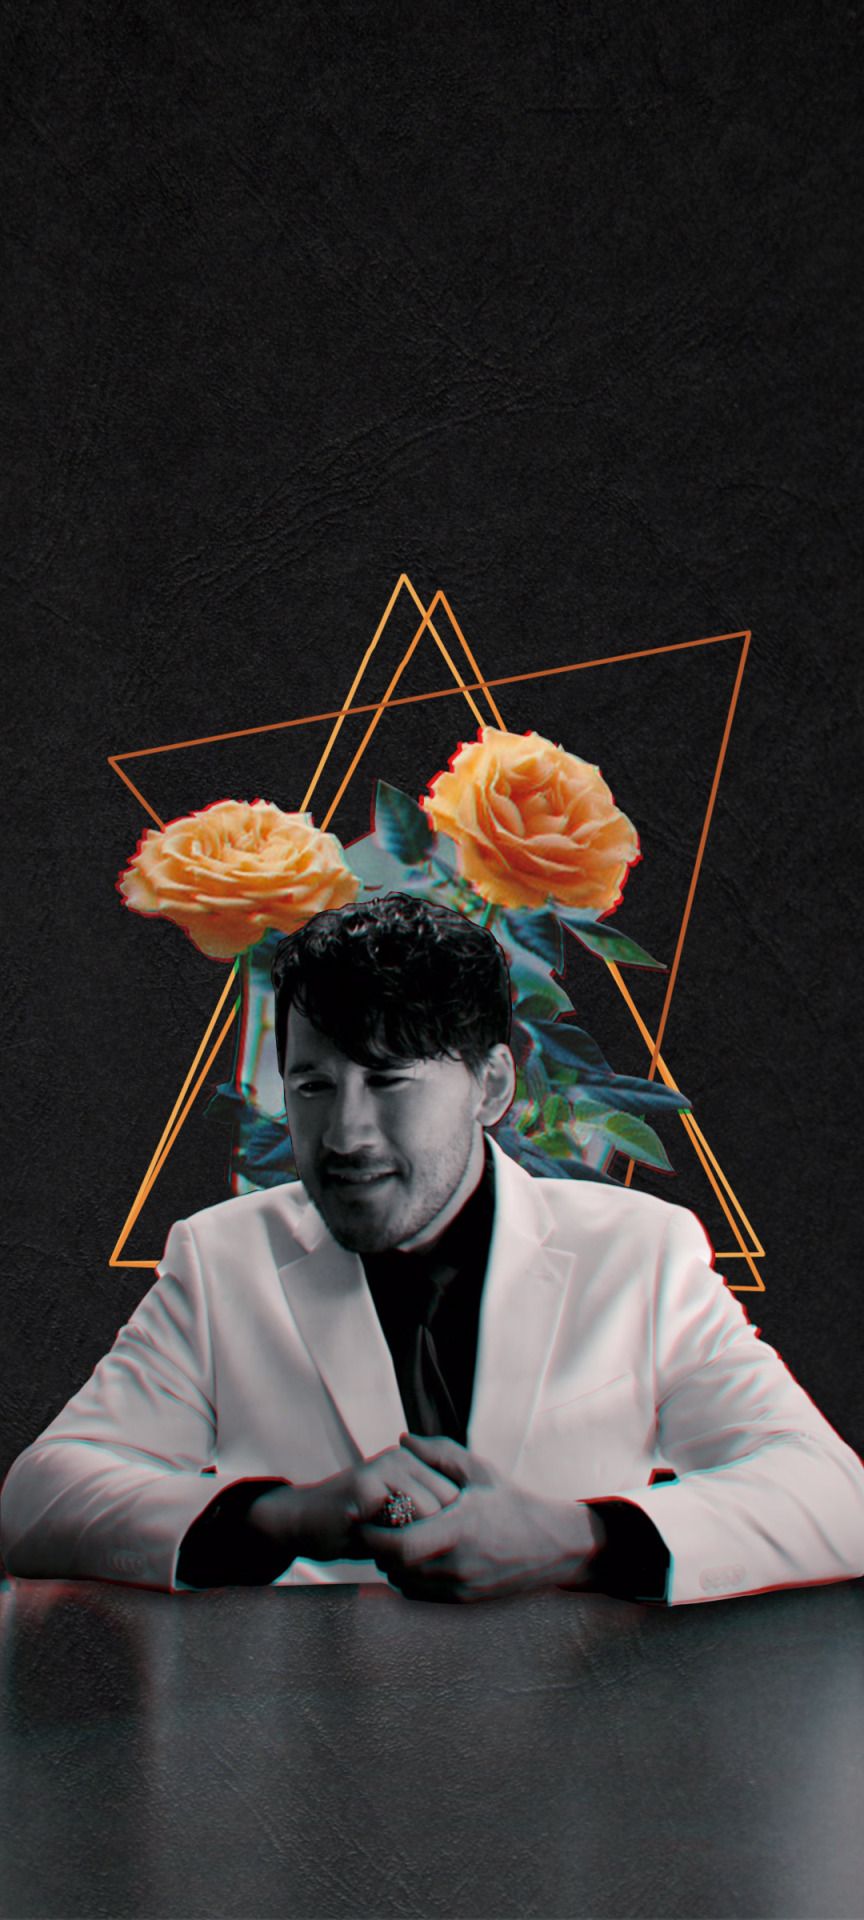 Wallpaper of a man in a white suit with two roses behind him - Markiplier